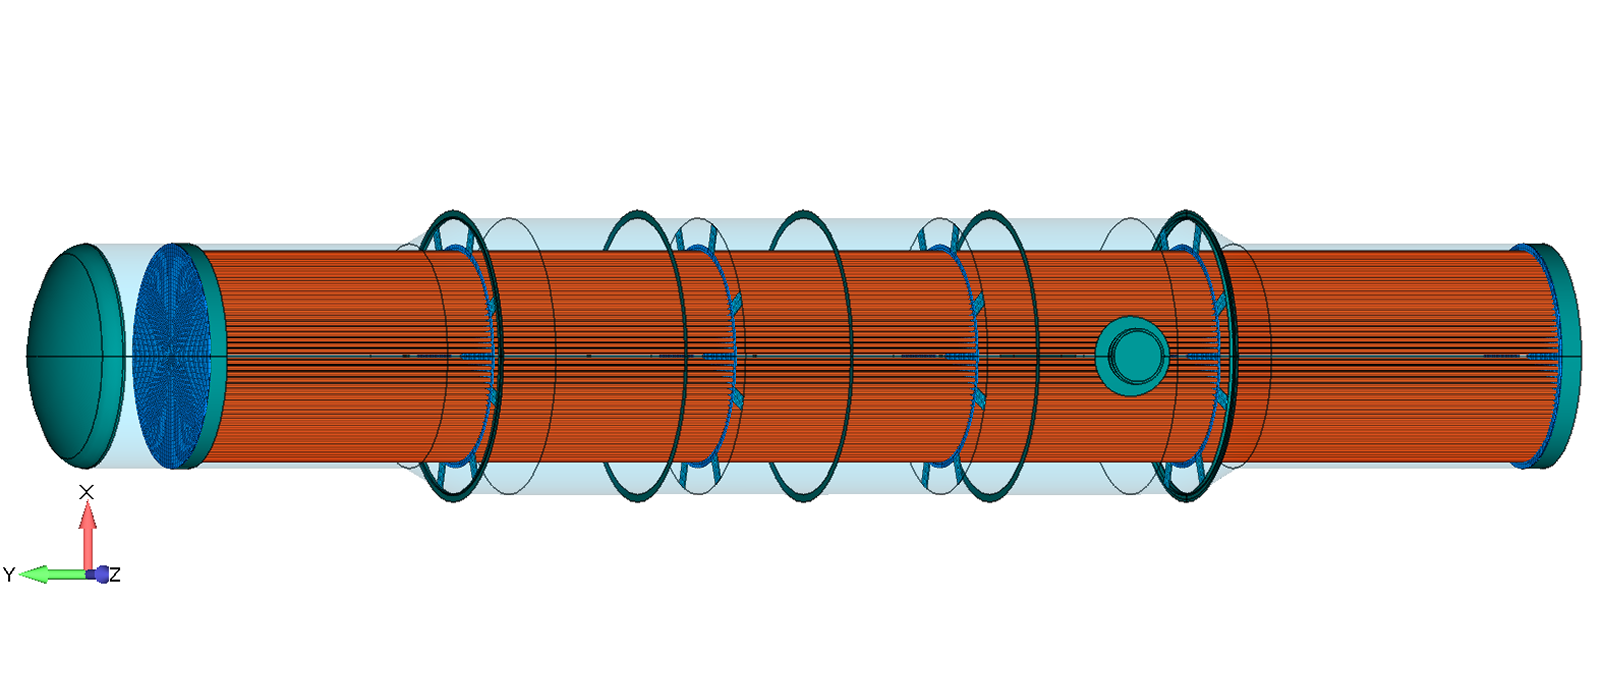 Figure 1:  The tubes of this shell-and-tube heat exchanger were modeled with beam elements.